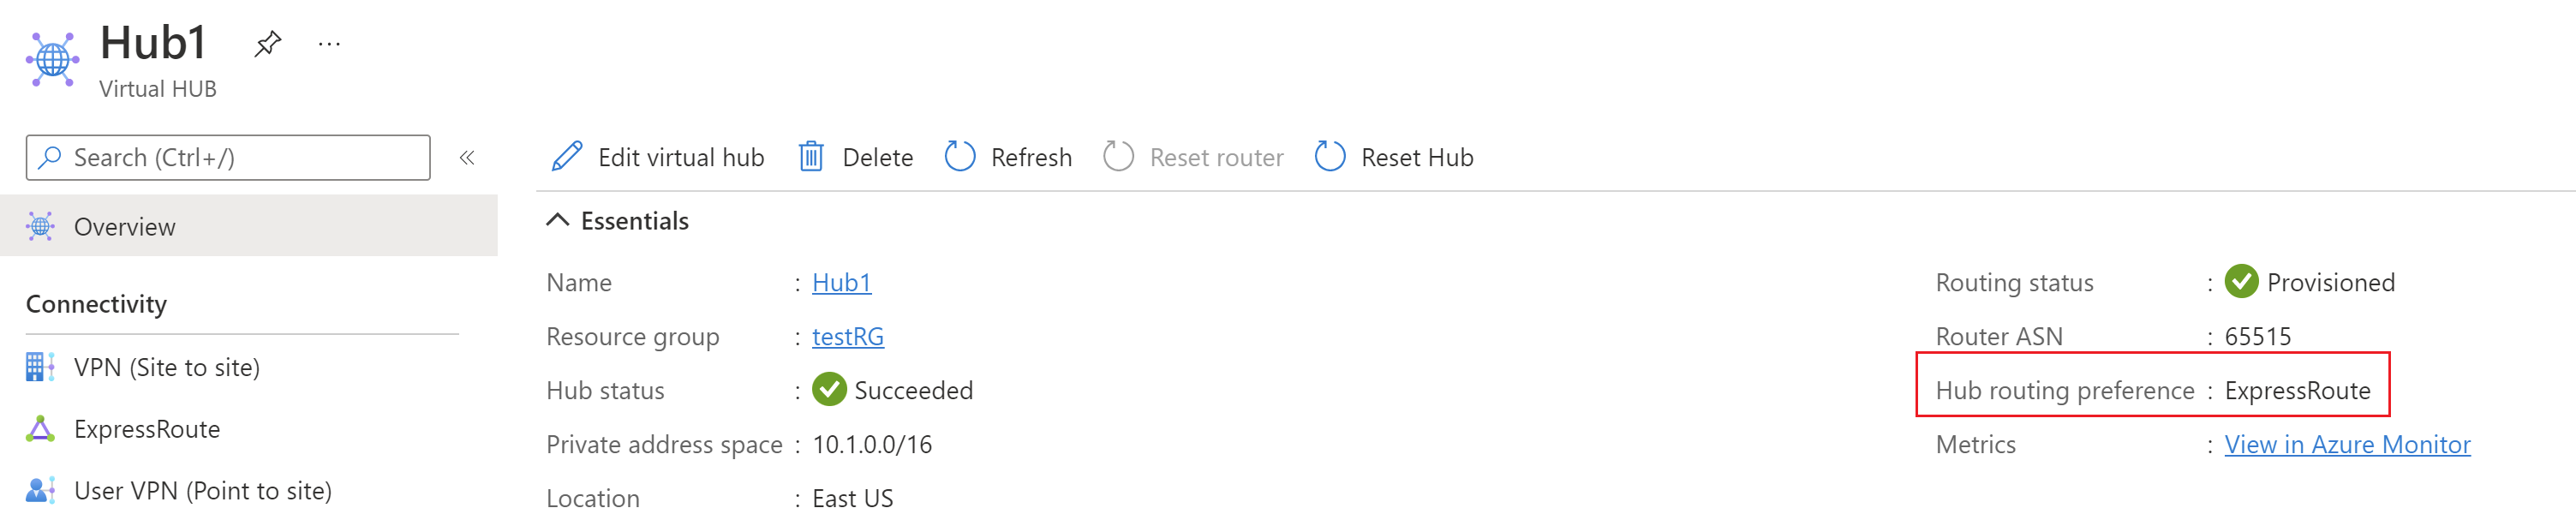 Screenshot shows virtual hub Overview page with routing preference.